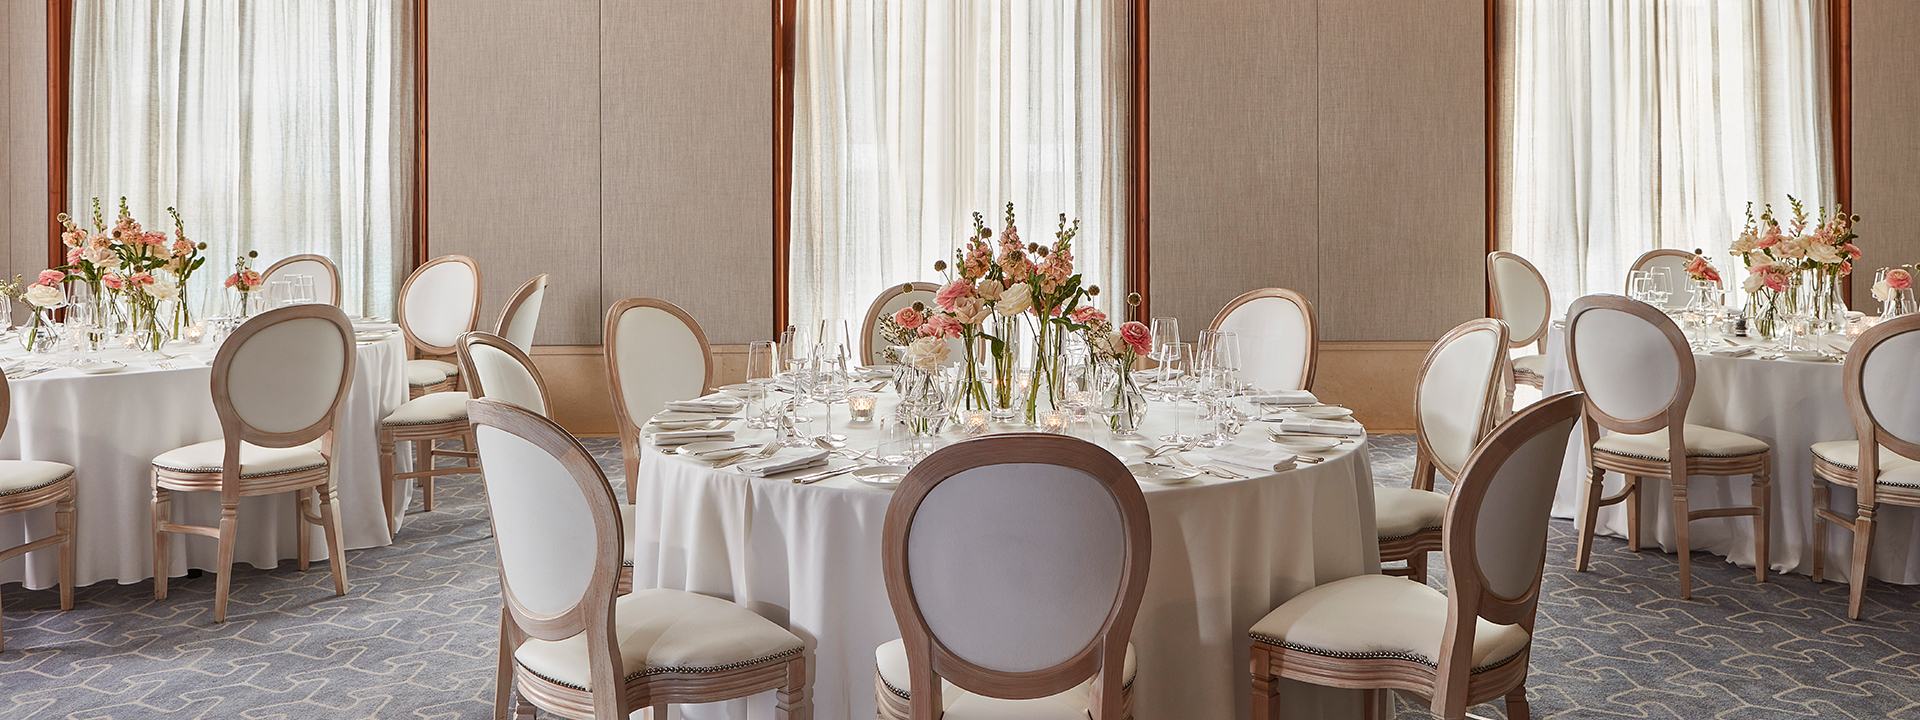 Belgravia room set up for a private event with table, chairs and flower arrangement.